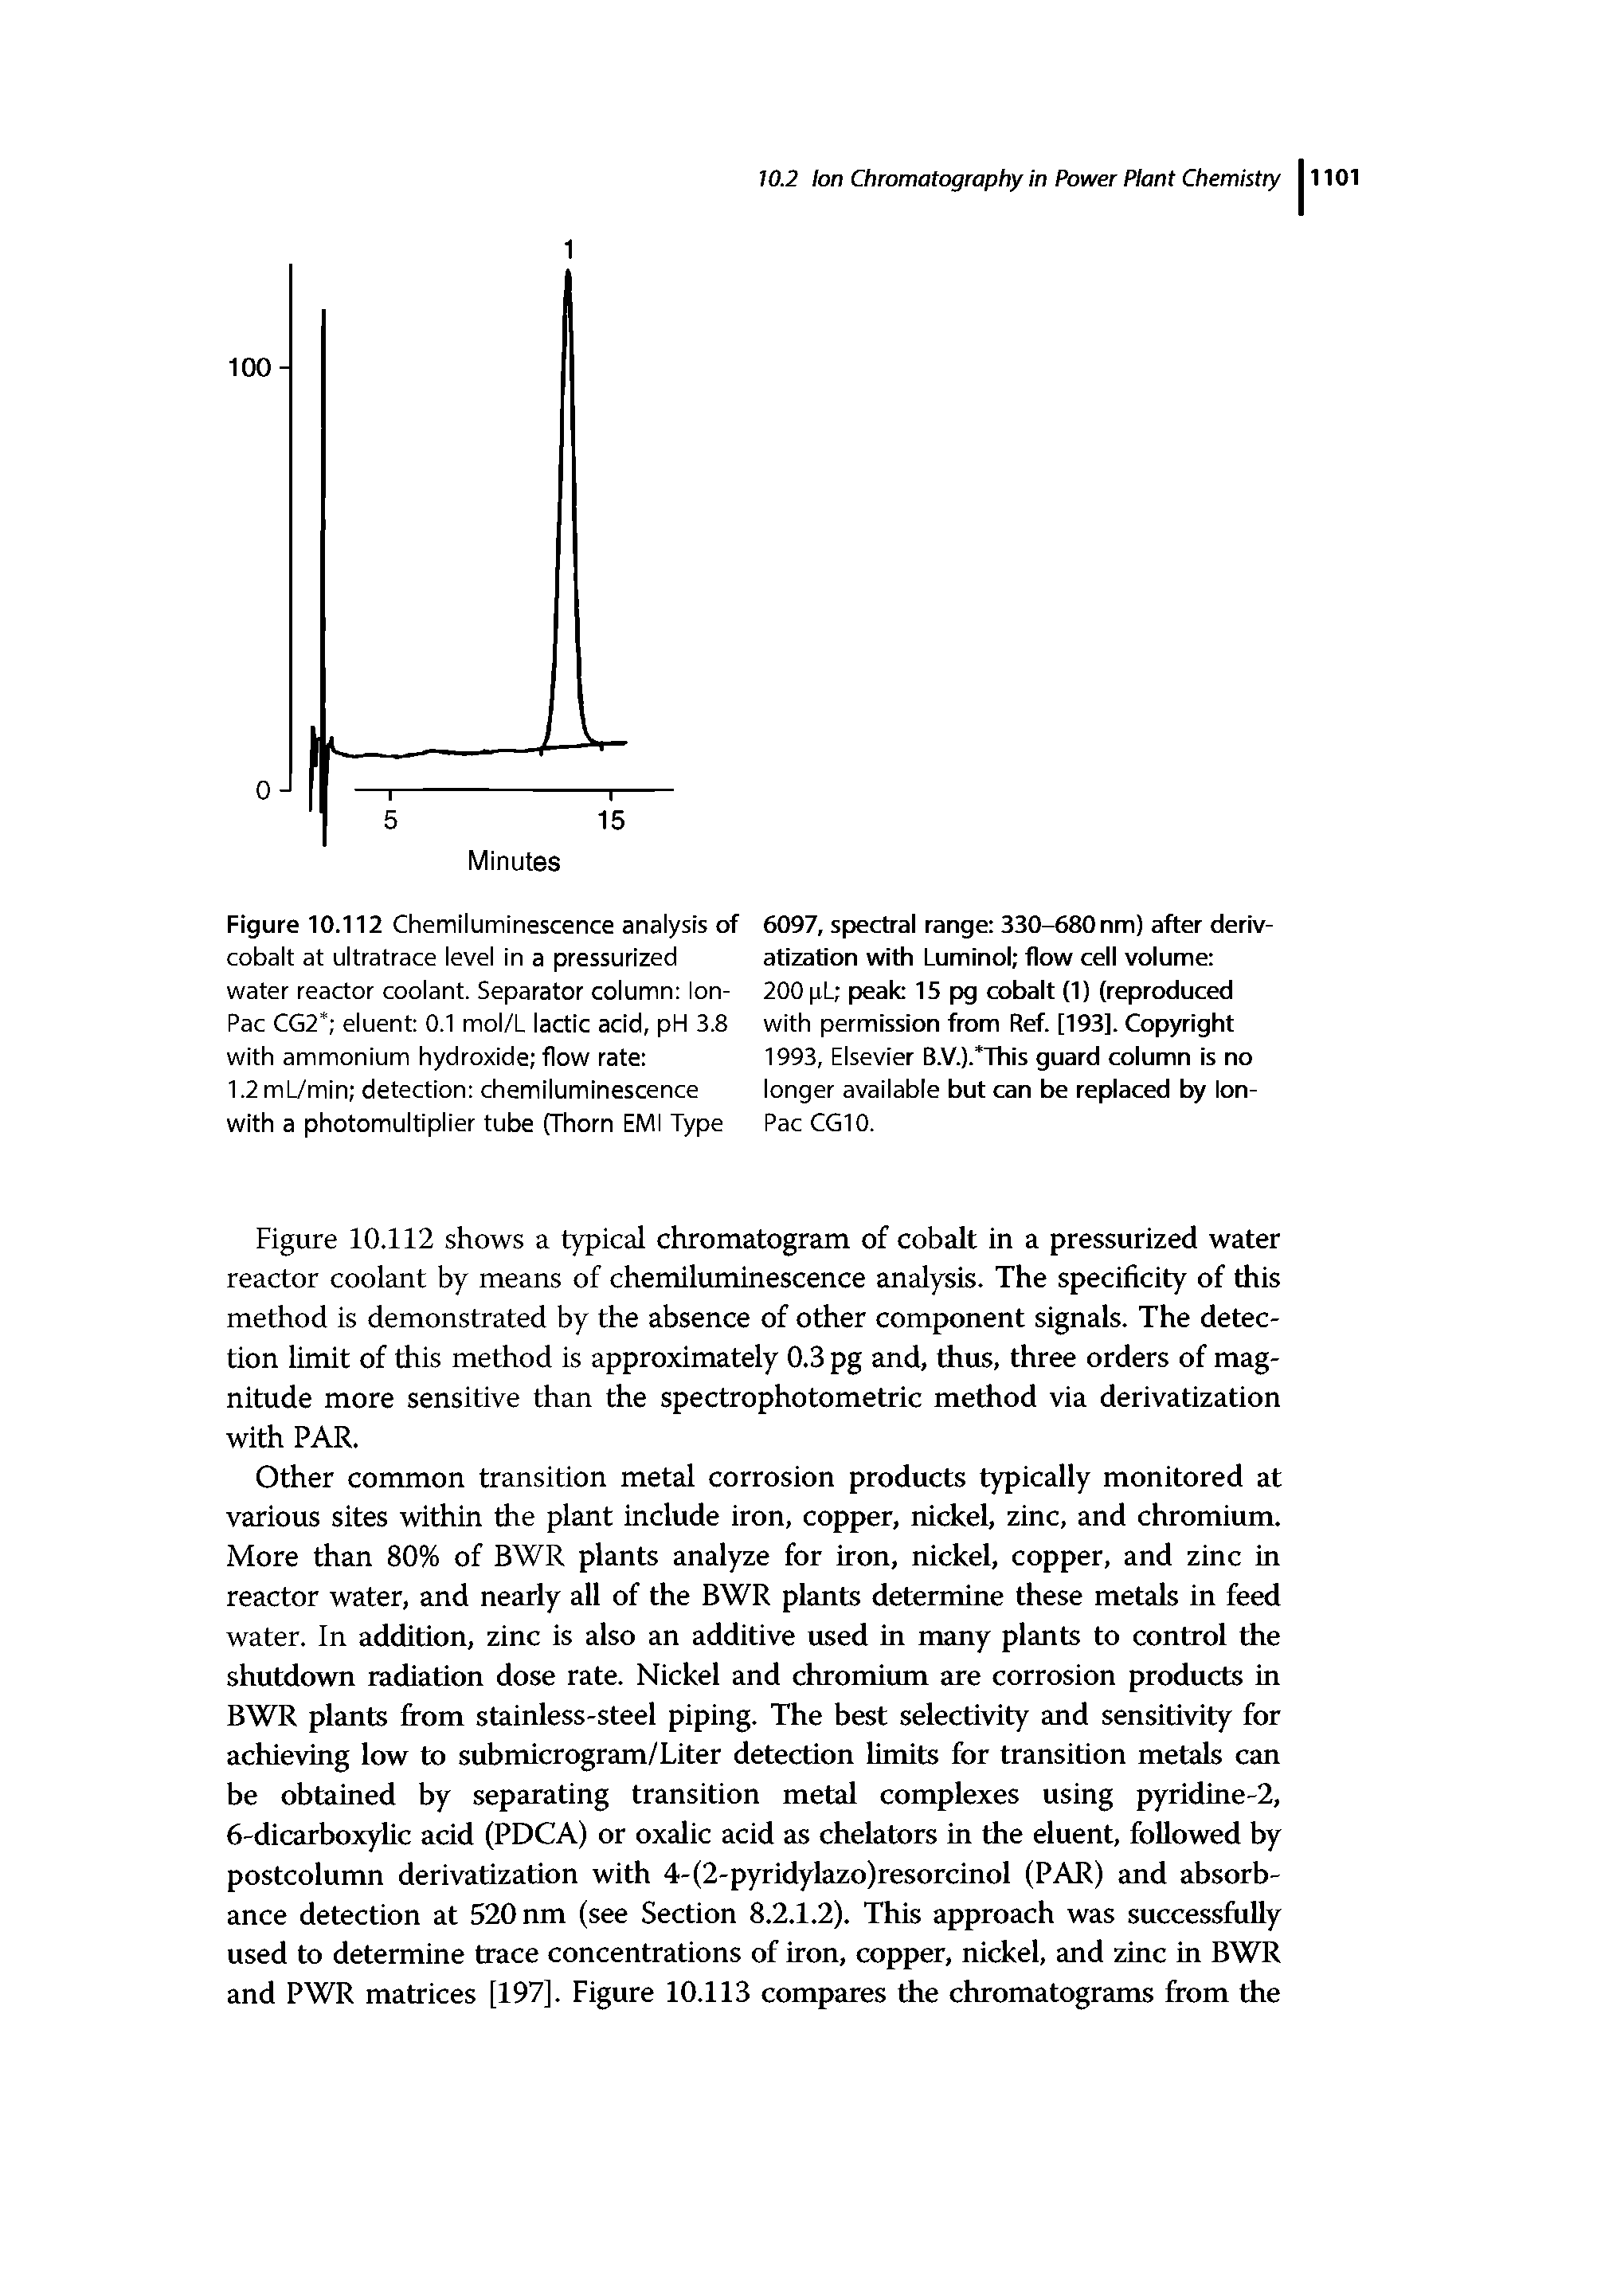 Figure 10.112 Chemiluminescence analysis of cobalt at ultratrace level in a pressurized water reactor coolant. Separator column lon-Pac CG2 eluent 0.1 mol/L lactic acid, pH 3.8 with ammonium hydroxide flow rate 1.2mL7min detection chemiluminescence with a photomultiplier tube (Thorn EMI Type...